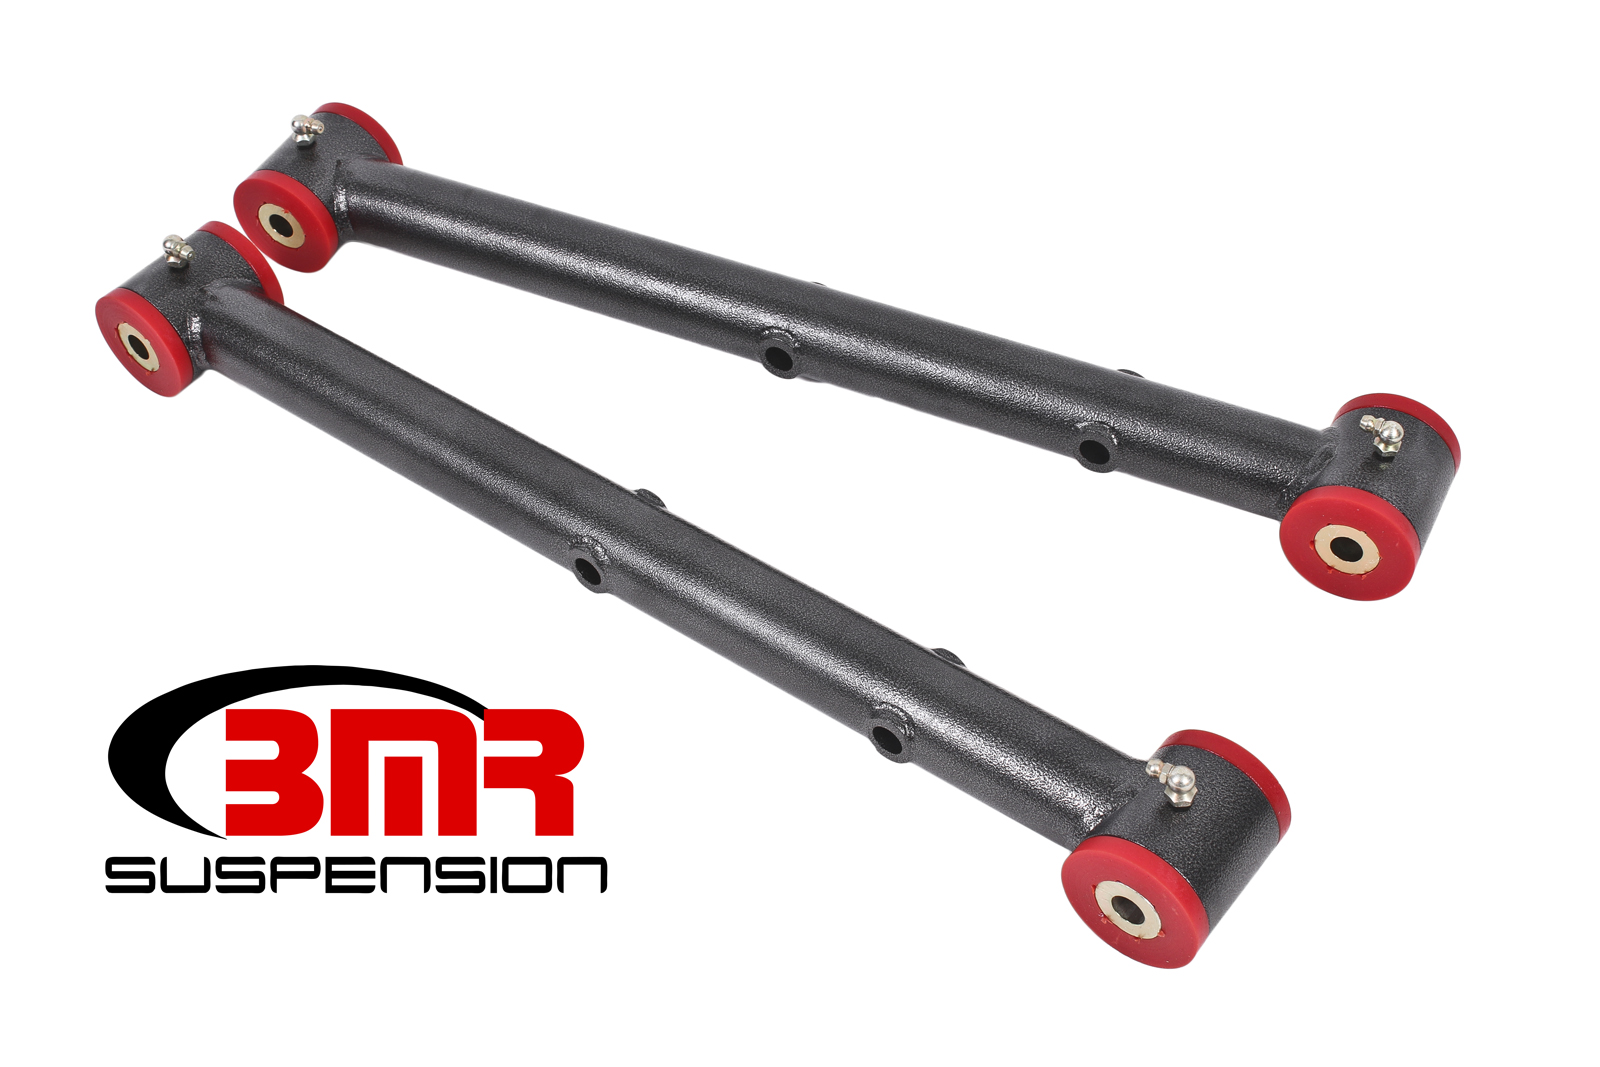 Lower Control Arms, DOM, Non-adjustable, Poly Bushings, Fits all 1978-1987 GM G-bodies, BMR Suspension - TCA039H